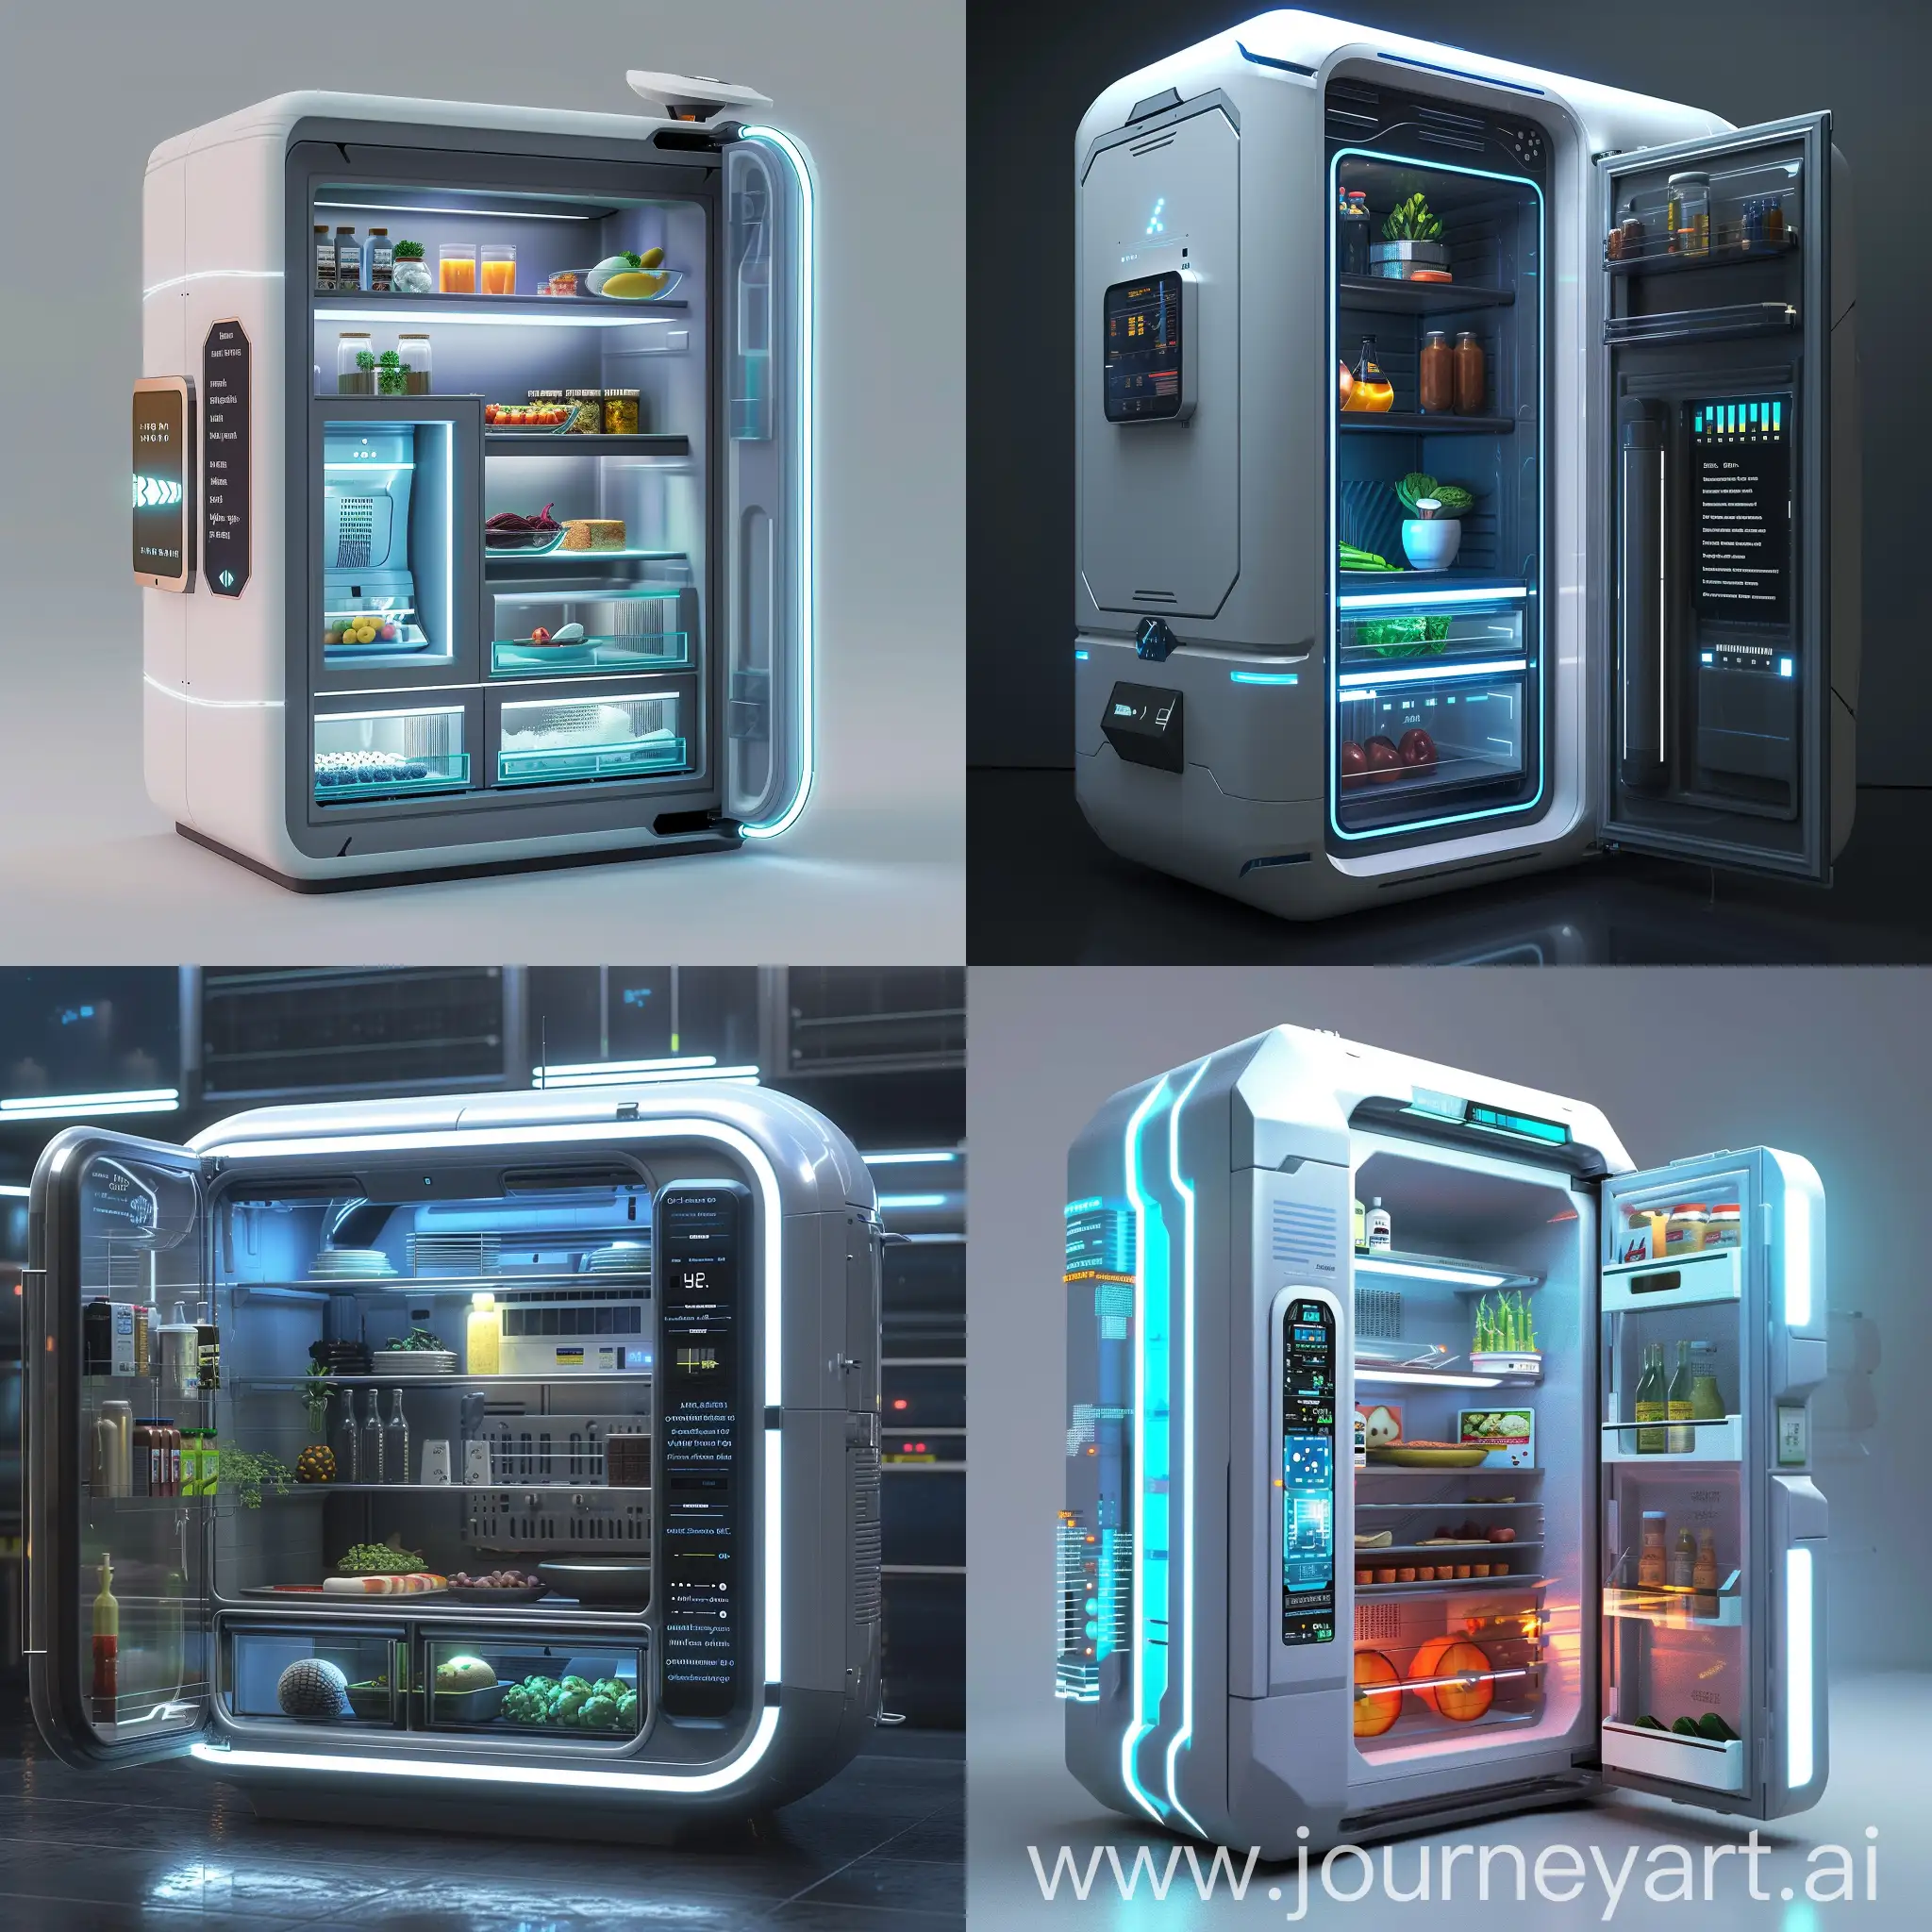 Futuristic-Smart-Refrigerator-with-MultiZone-Climate-Control-and-AIPowered-Features